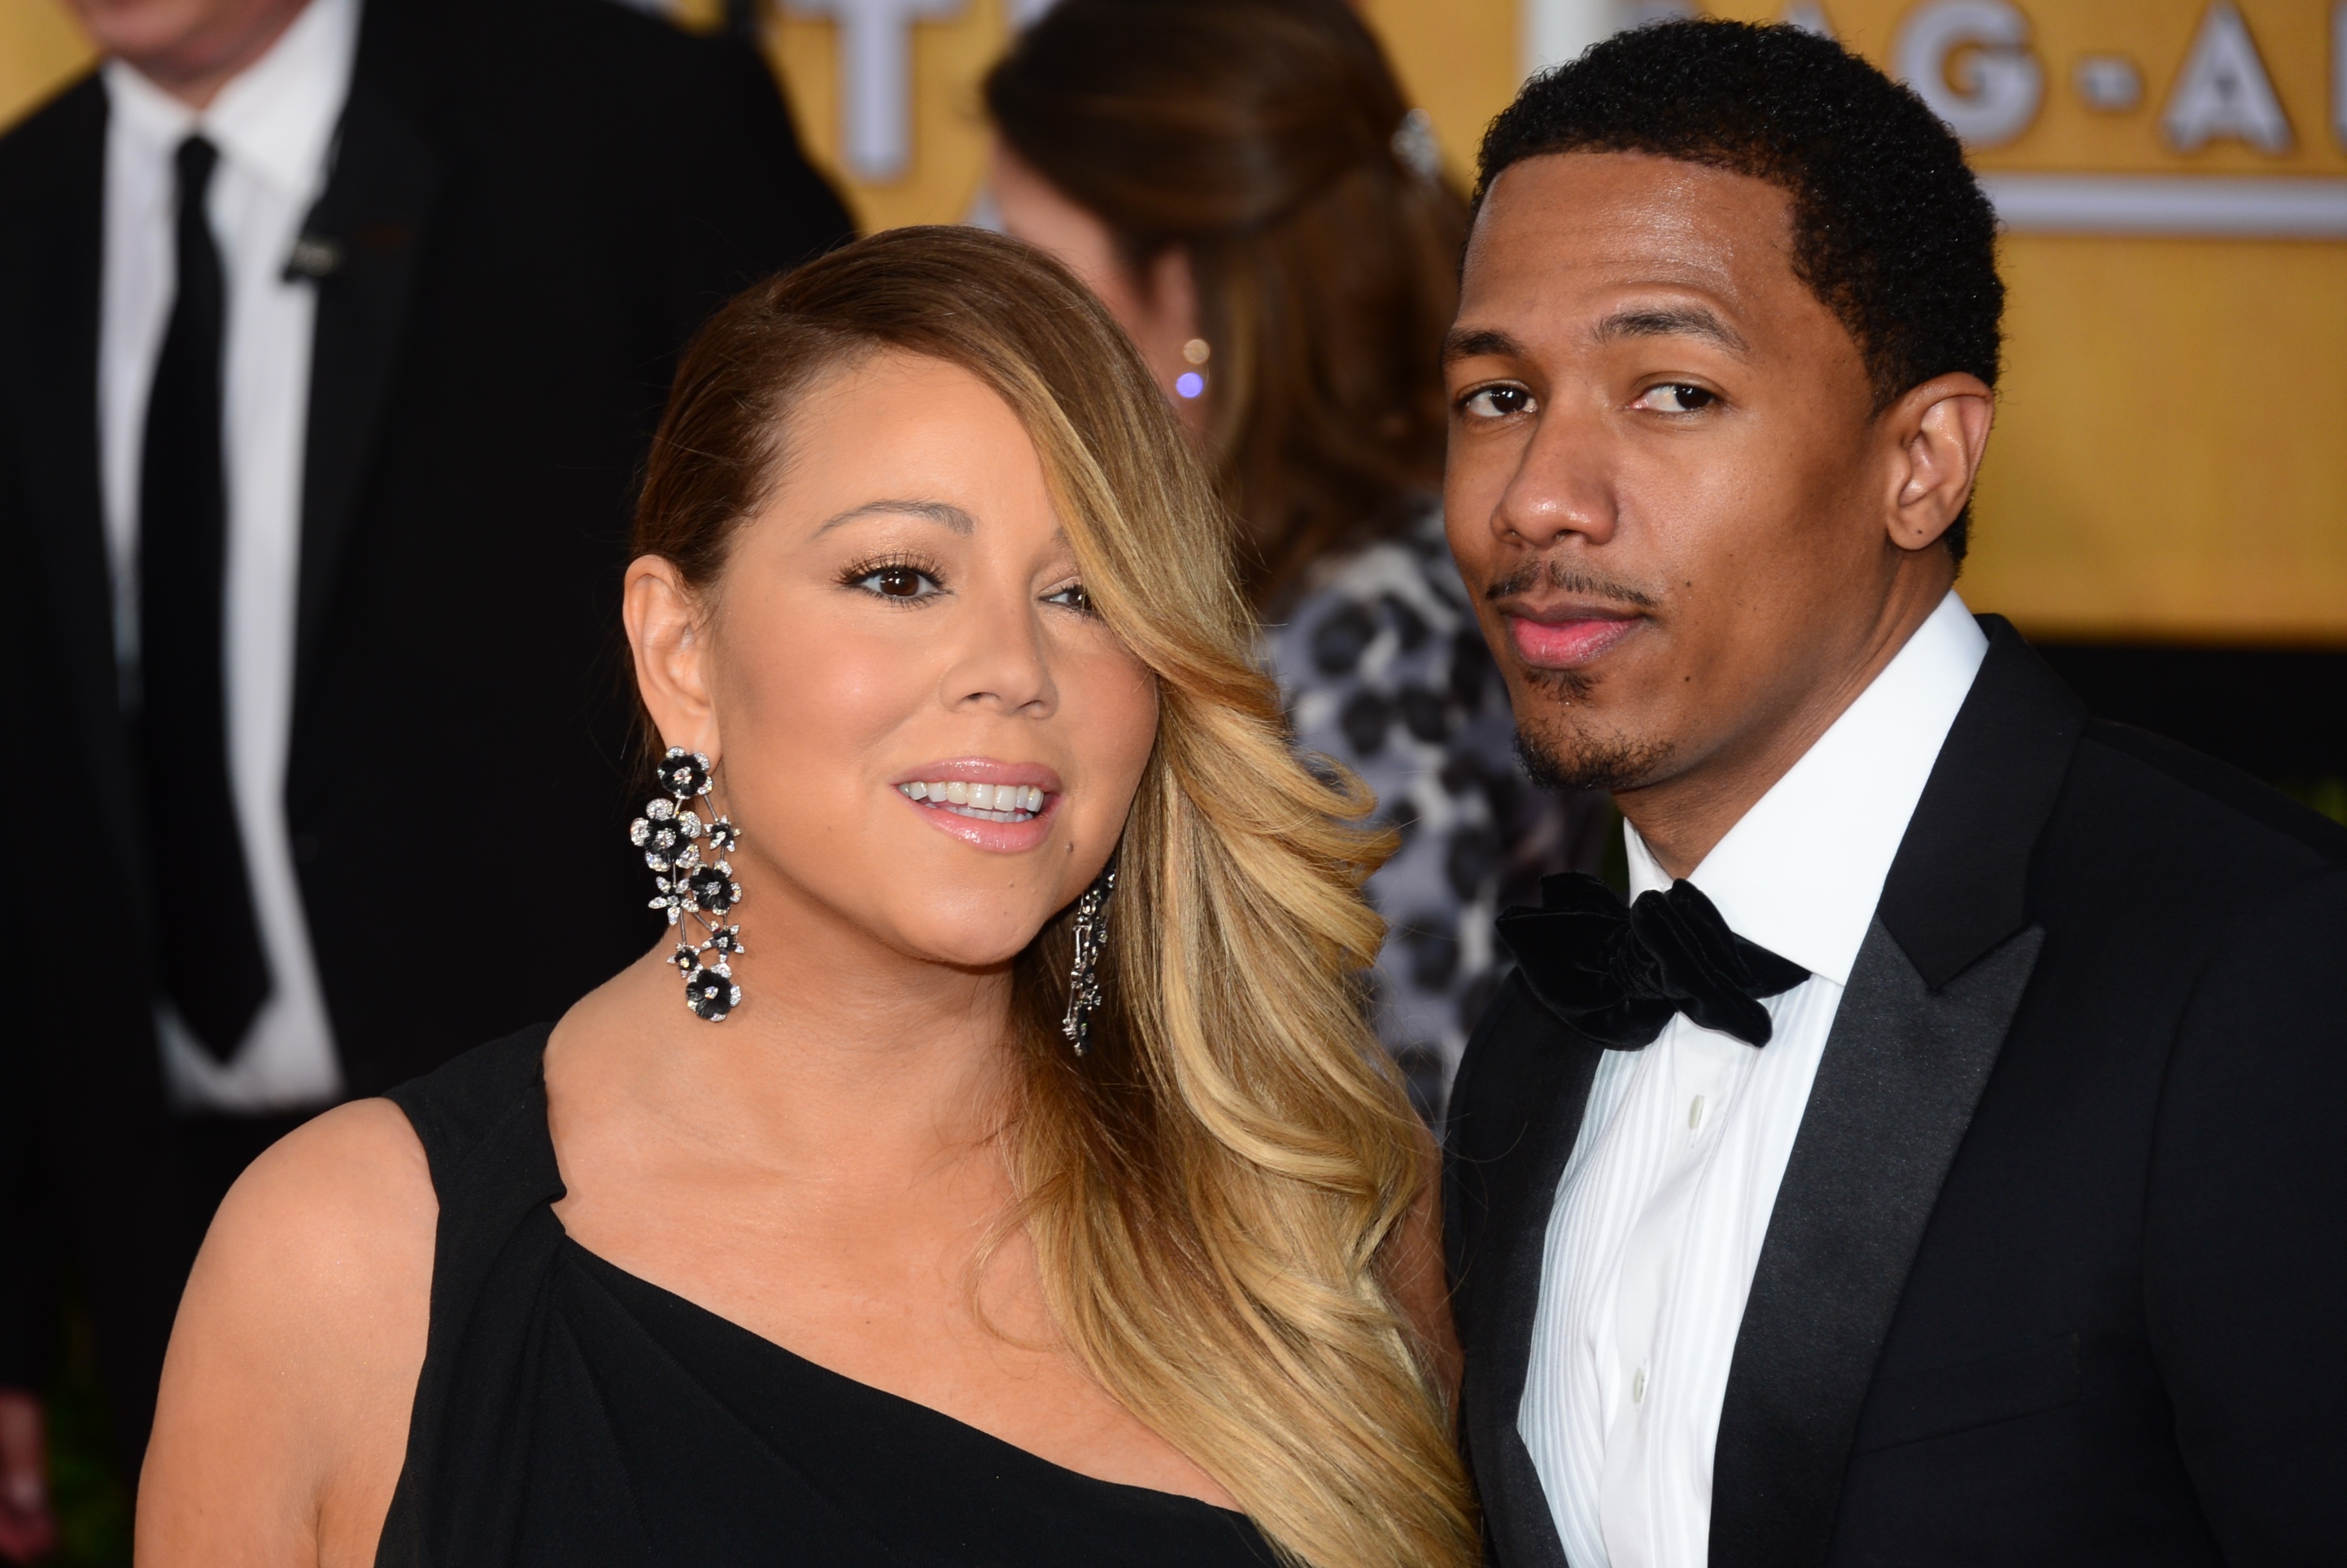 Mariah Carey and Nick Cannon at the 20th annual Screen Actors Guild (SAG) Awards on January 18, 2014, in Los Angeles. | Source: Getty Images